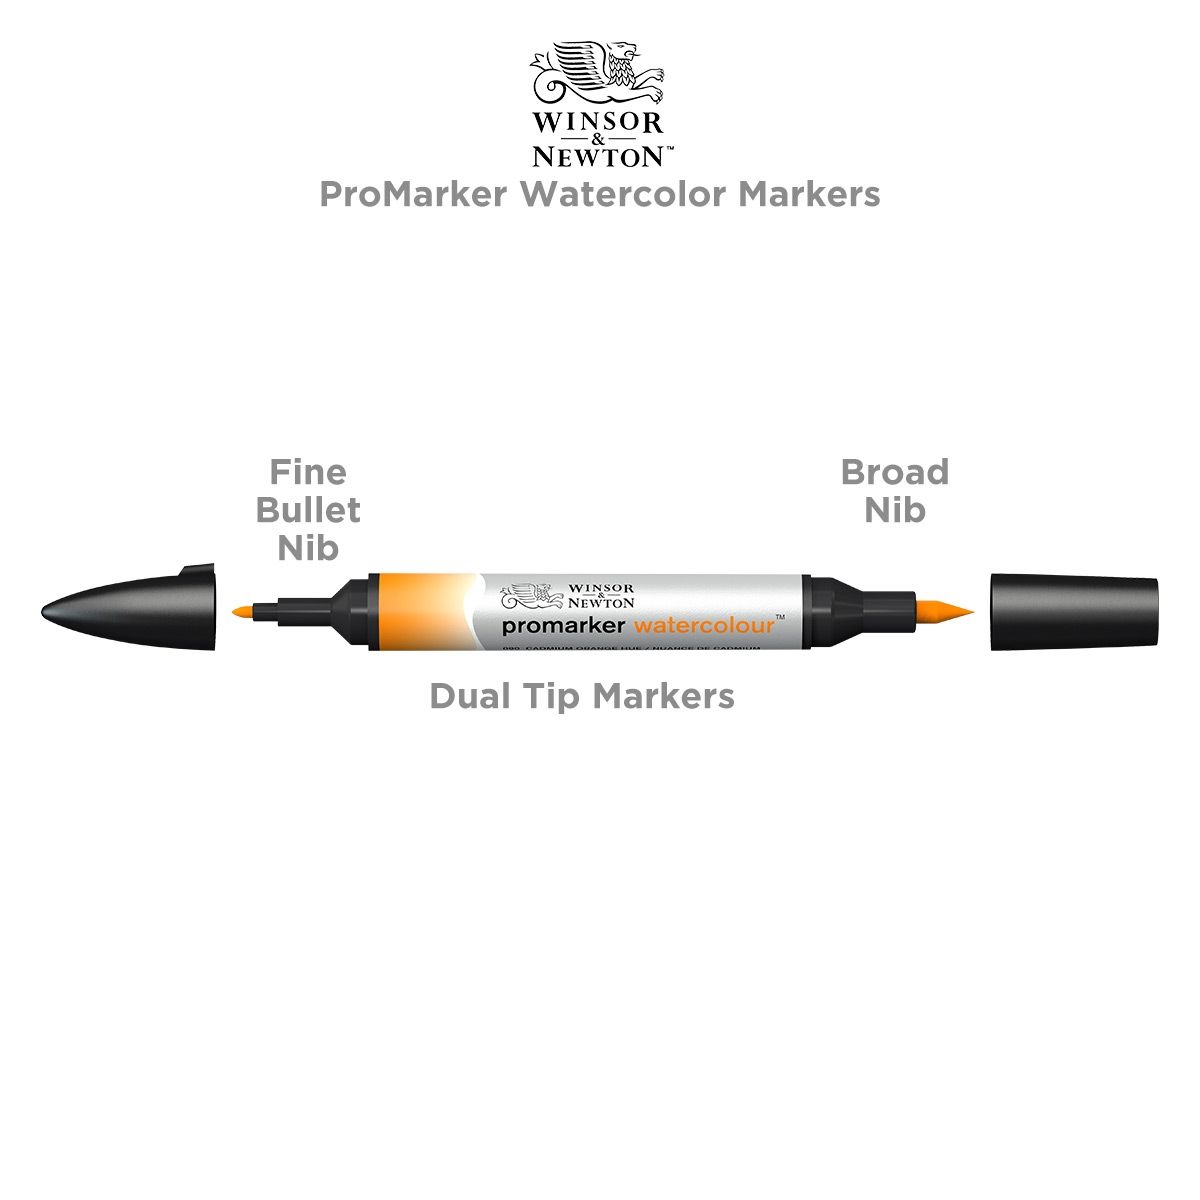 Winsor & Newton ProMarker Watercolor Marker’s have 2 tips; 1 fine point and 1 flexible brush tip